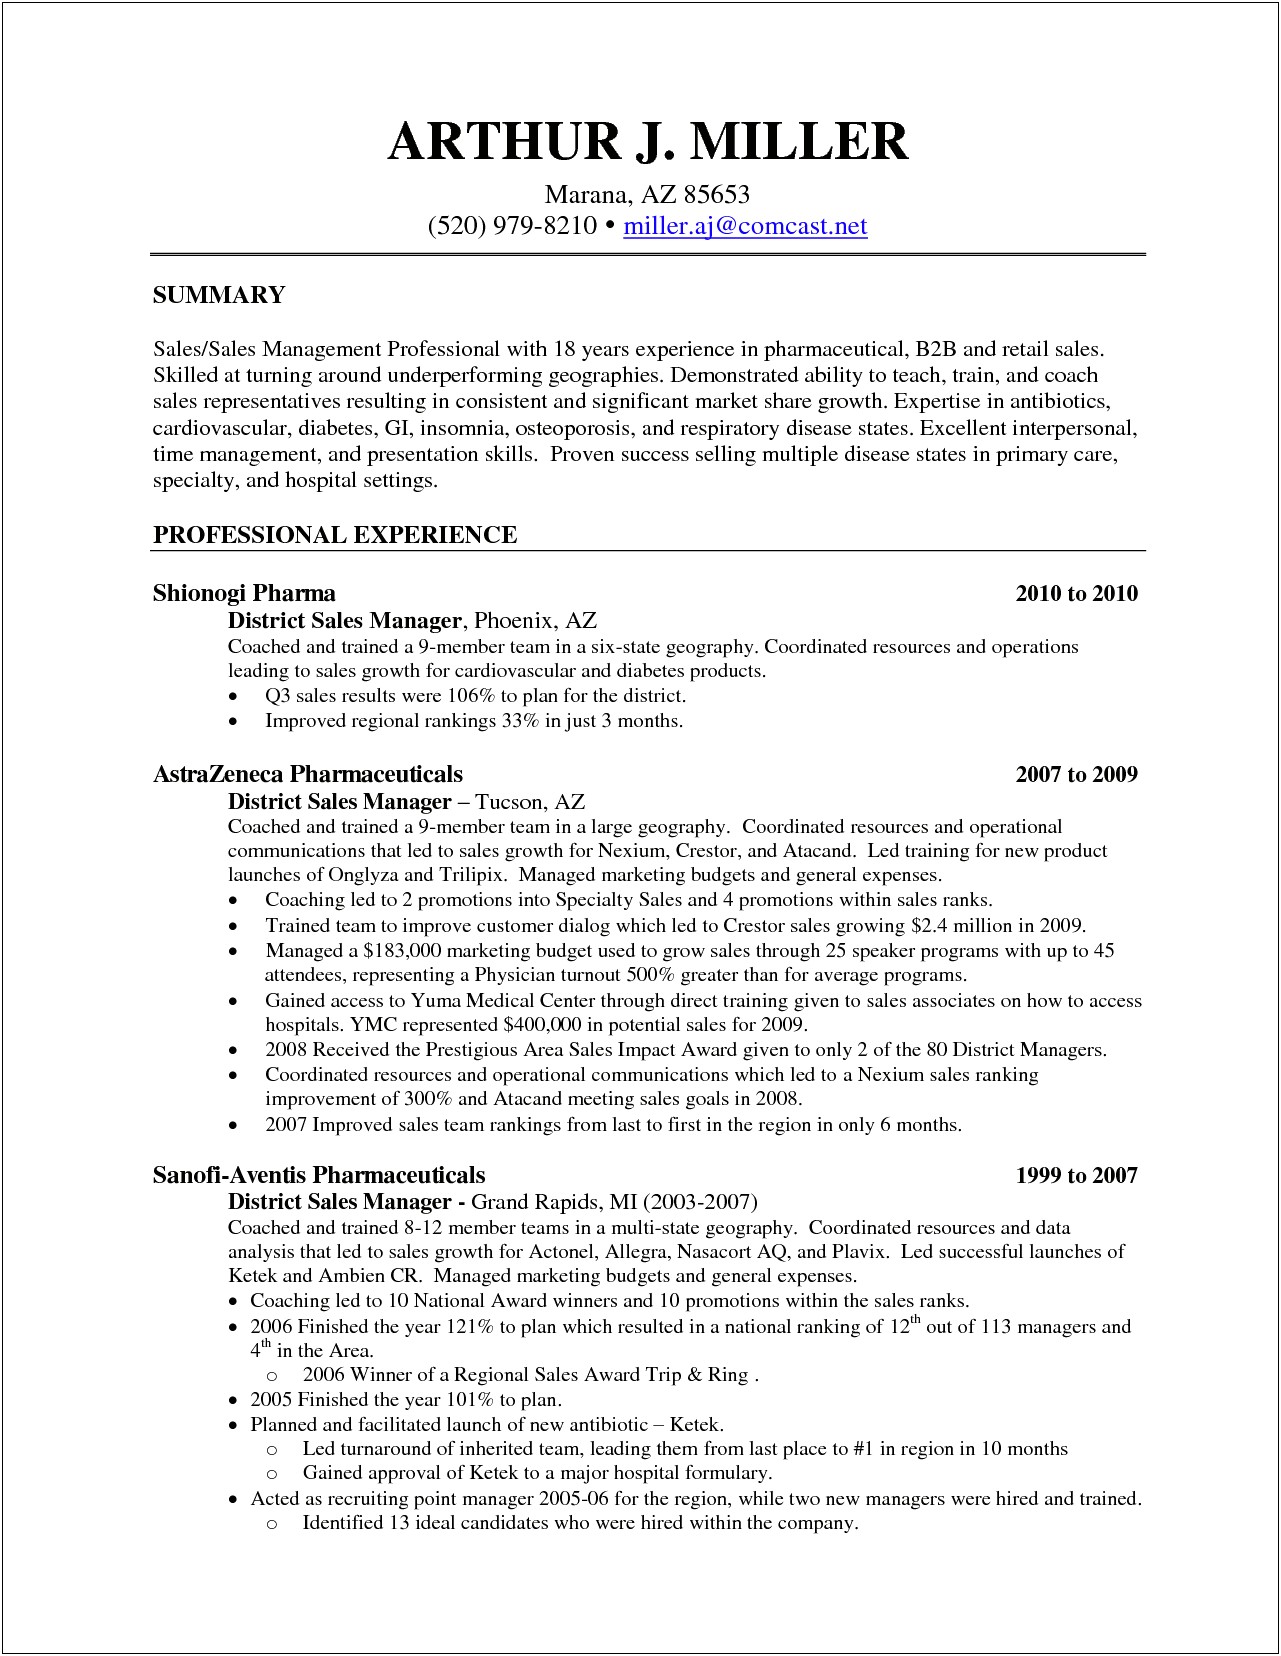 Pharmaceutical District Sales Manager Resume